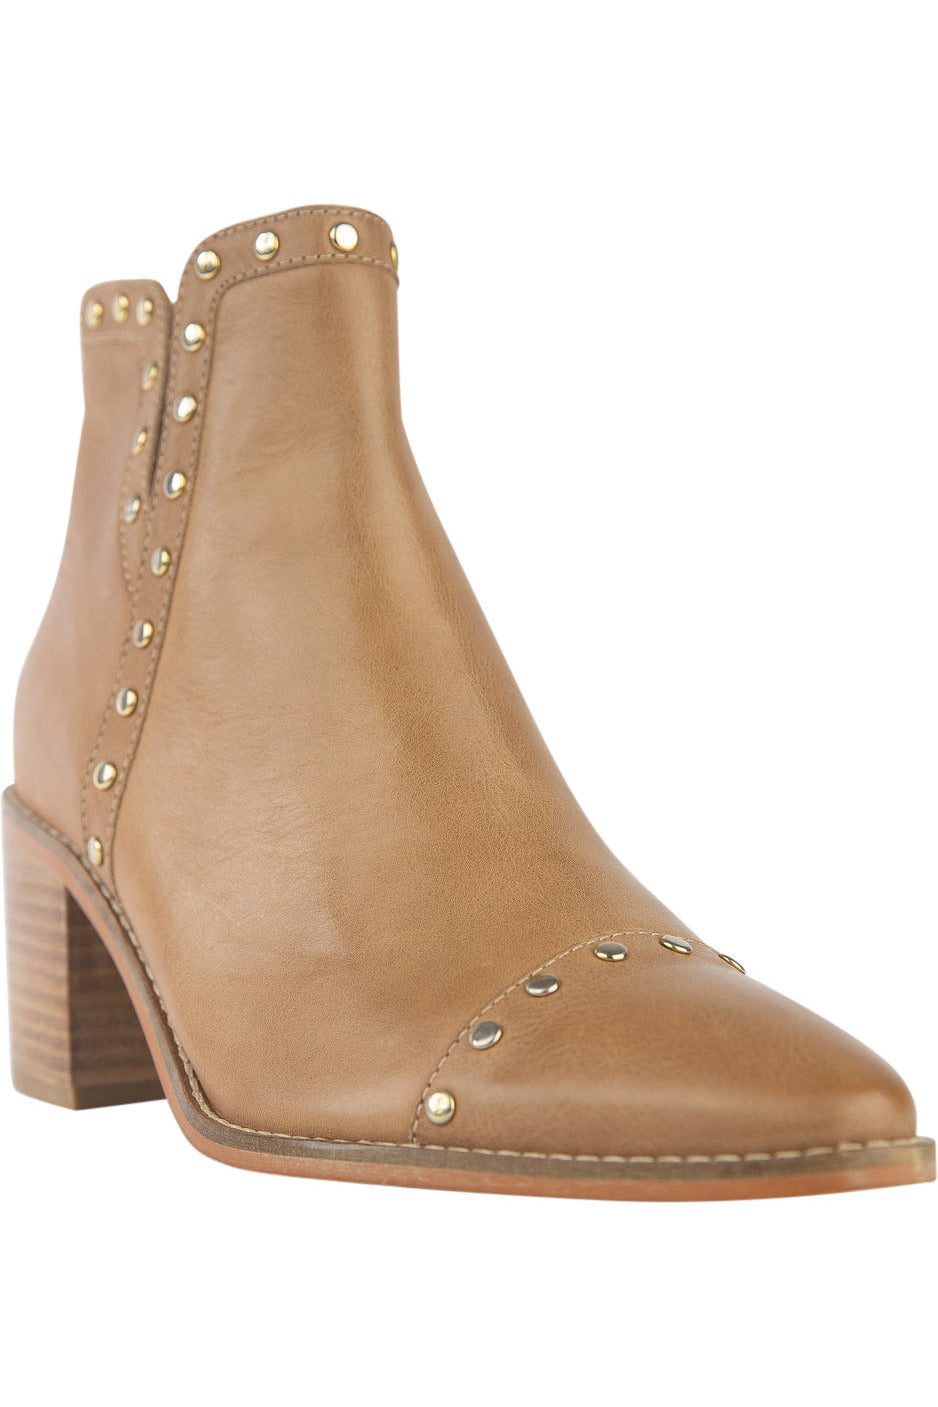 Isabella Manhattan Stud Ankle boot in Light Tan